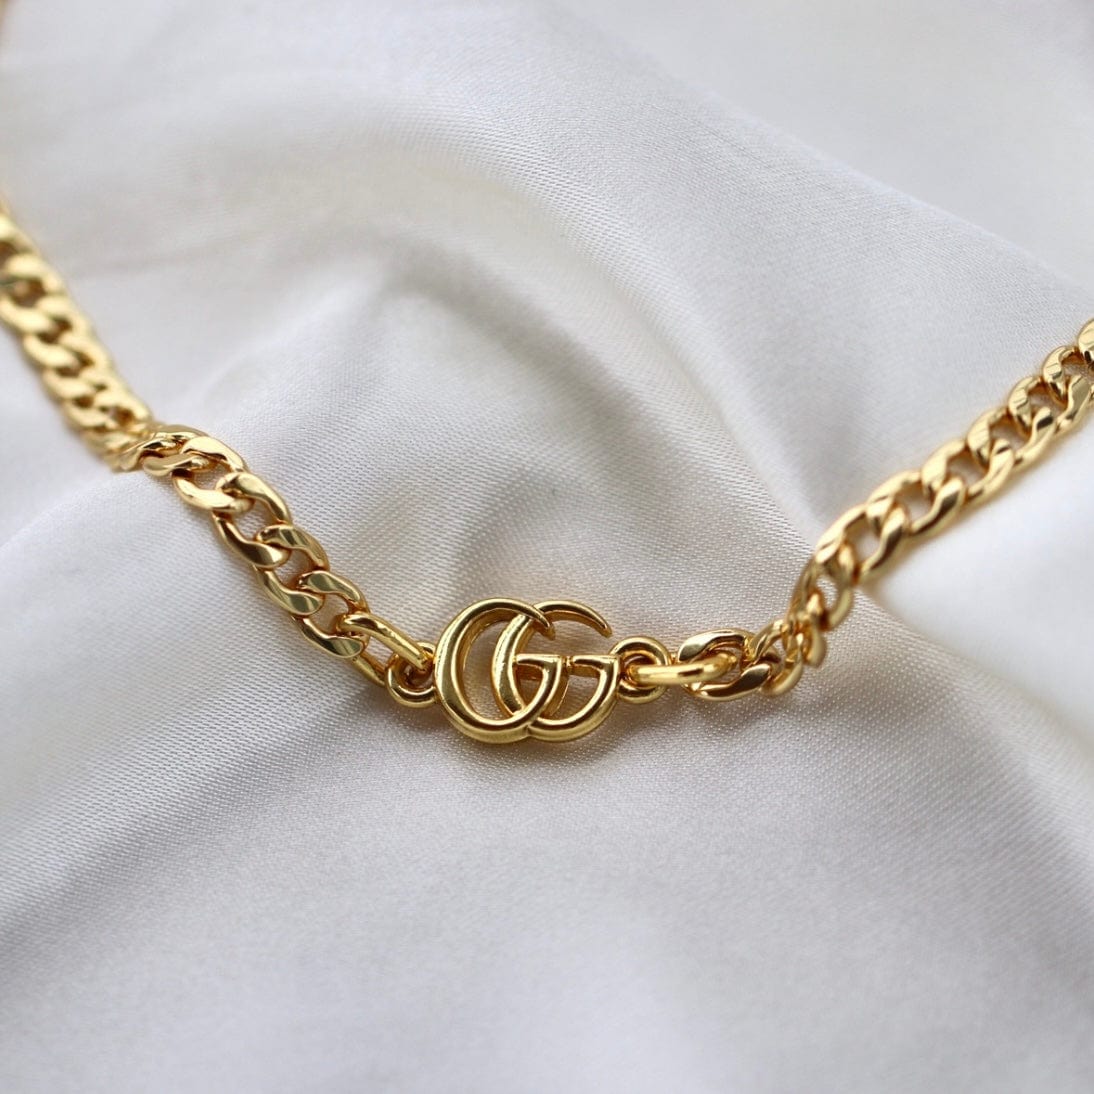 Repurposed Vintage XL Gucci Gold GG Chunky Choker Necklace